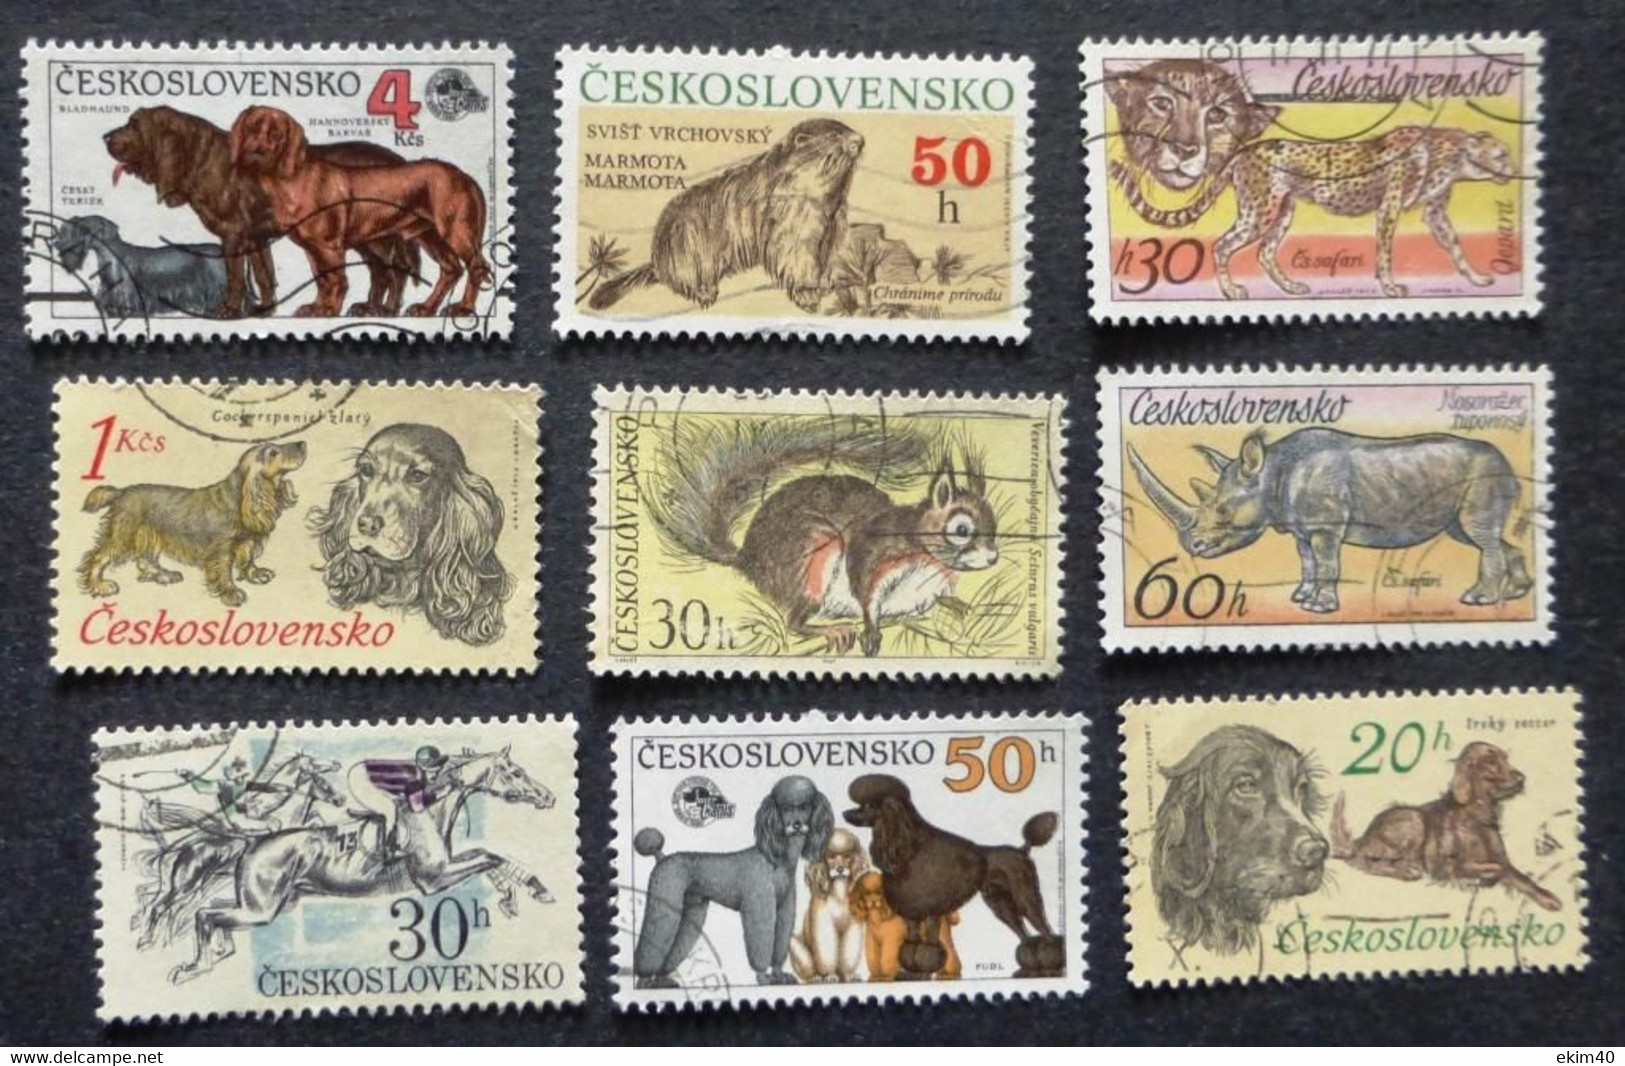 Selection Of Used/Cancelled Stamps From Czechoslovakia Wild & Domestic Animals. No DC-450 - Used Stamps